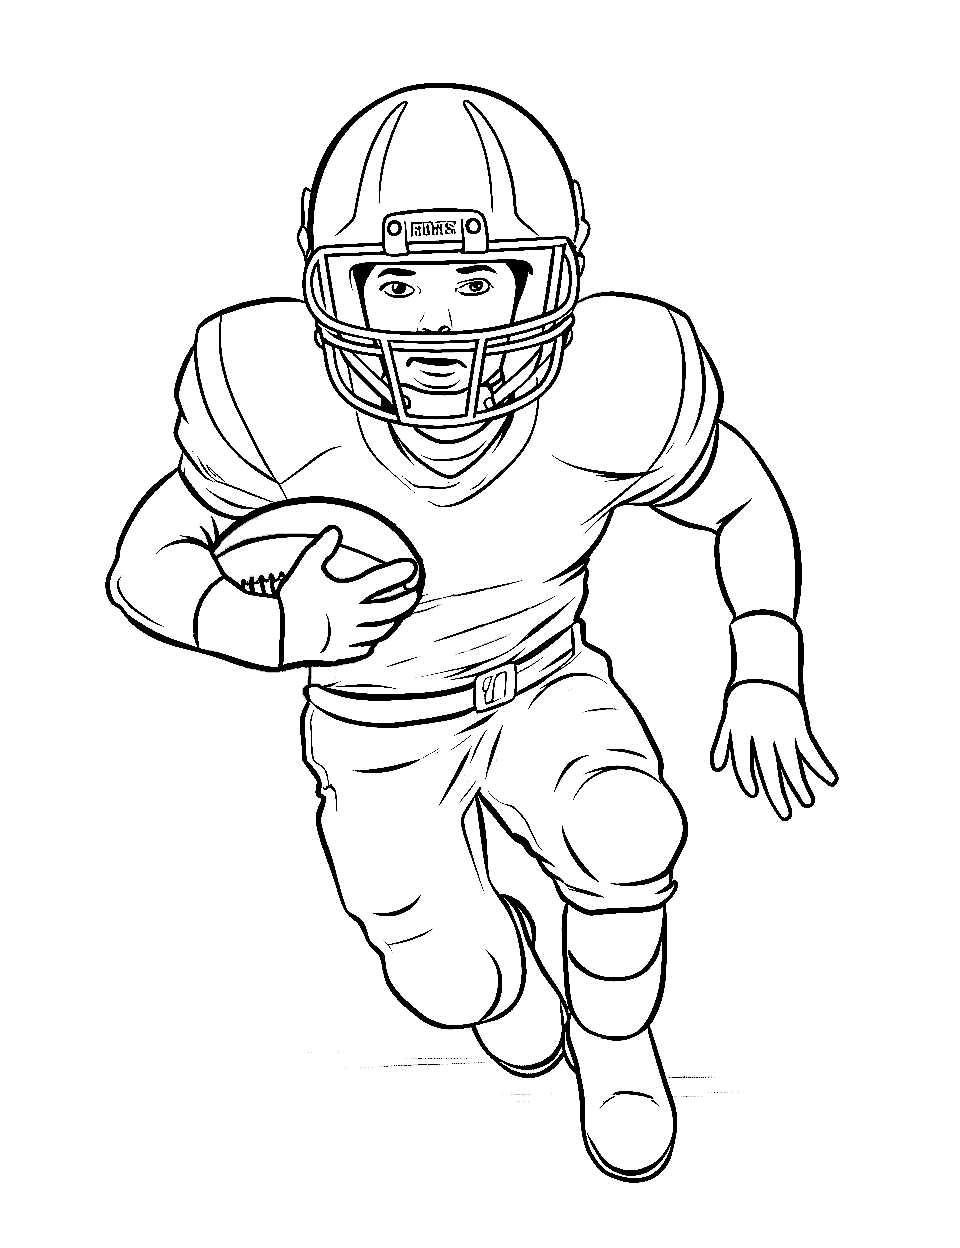 Rumbling Running Back Coloring Page - A running back charging down the field with a football tucked under one arm.